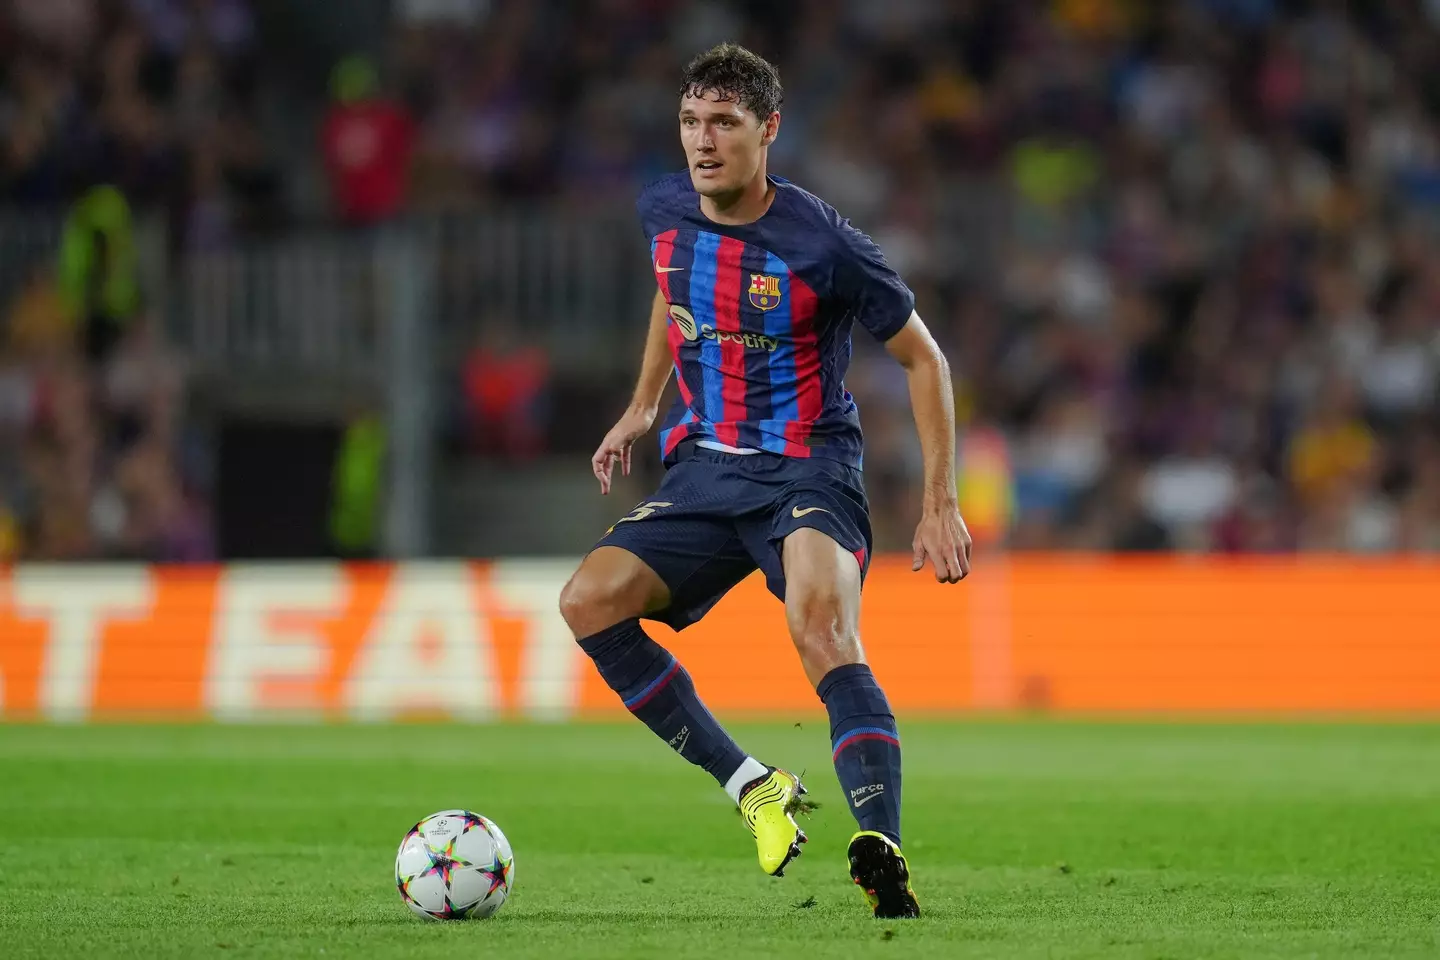 The signing of Andreas Christensen is one reason why Pique has been pushed further down the pecking order. Image: Alamy